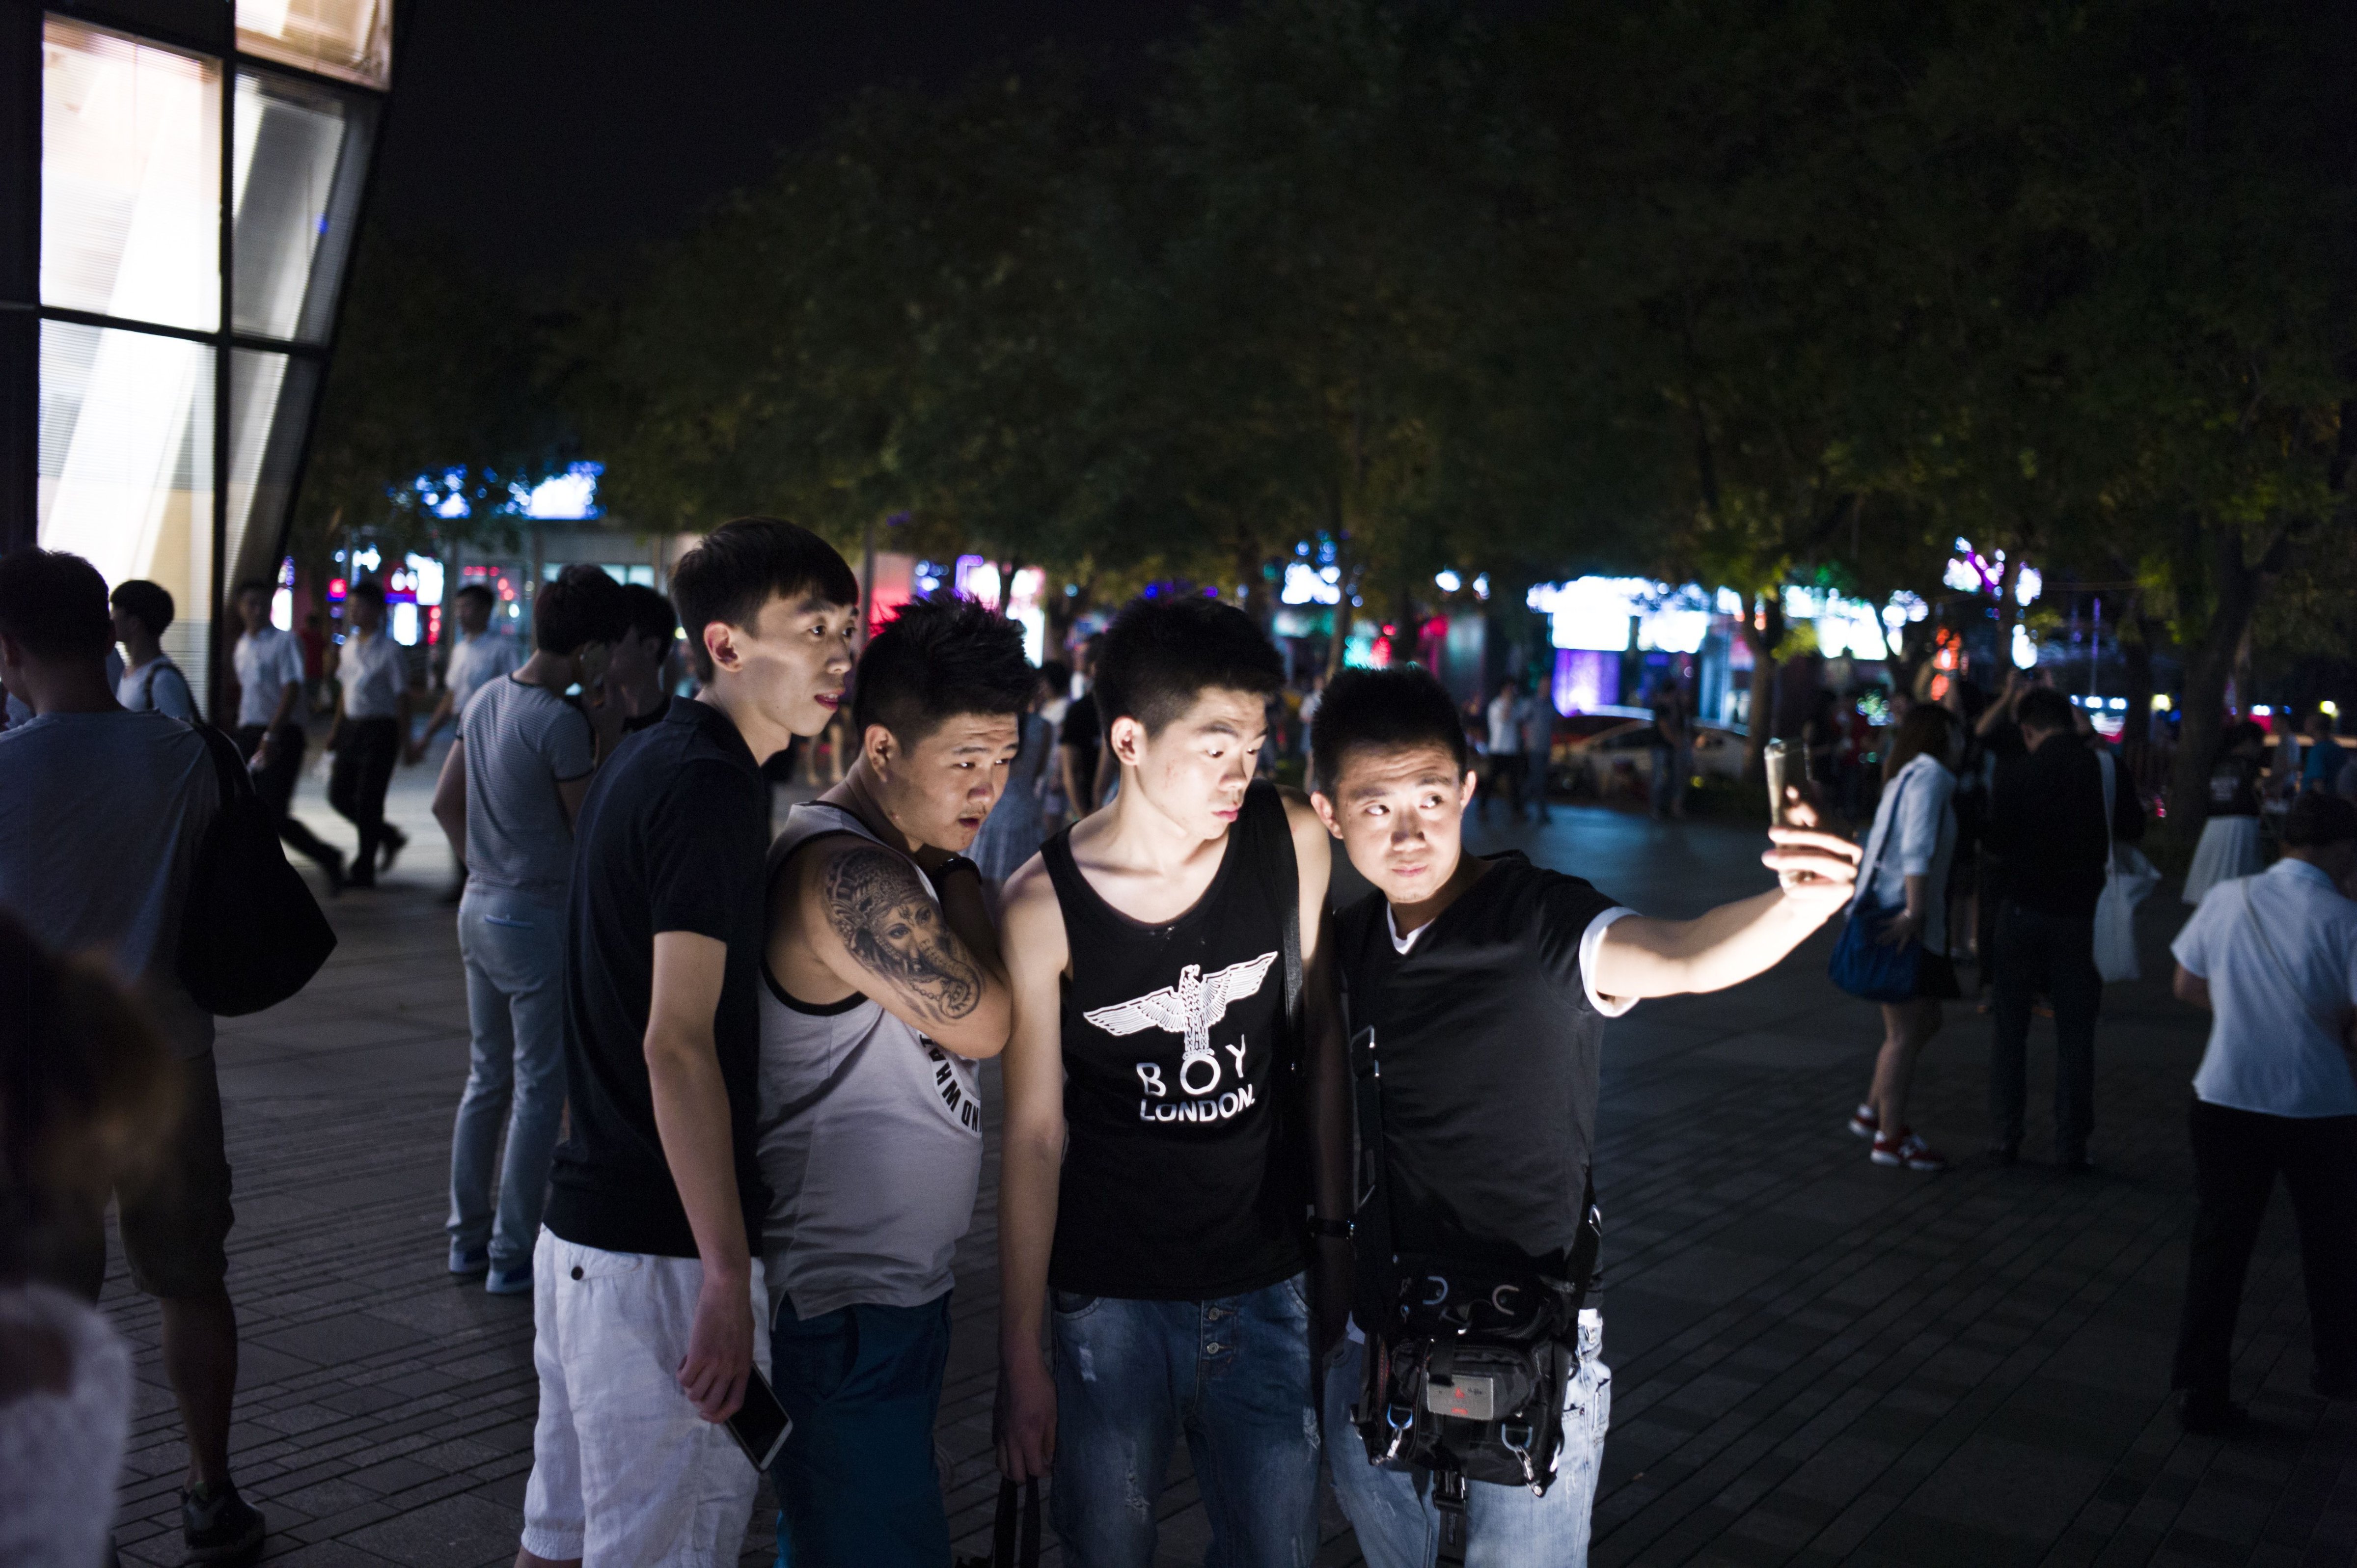 People gather in front of a Uniqlo clothes store in Beijing. (FRED DUFOUR&mdash;AFP/Getty Images)